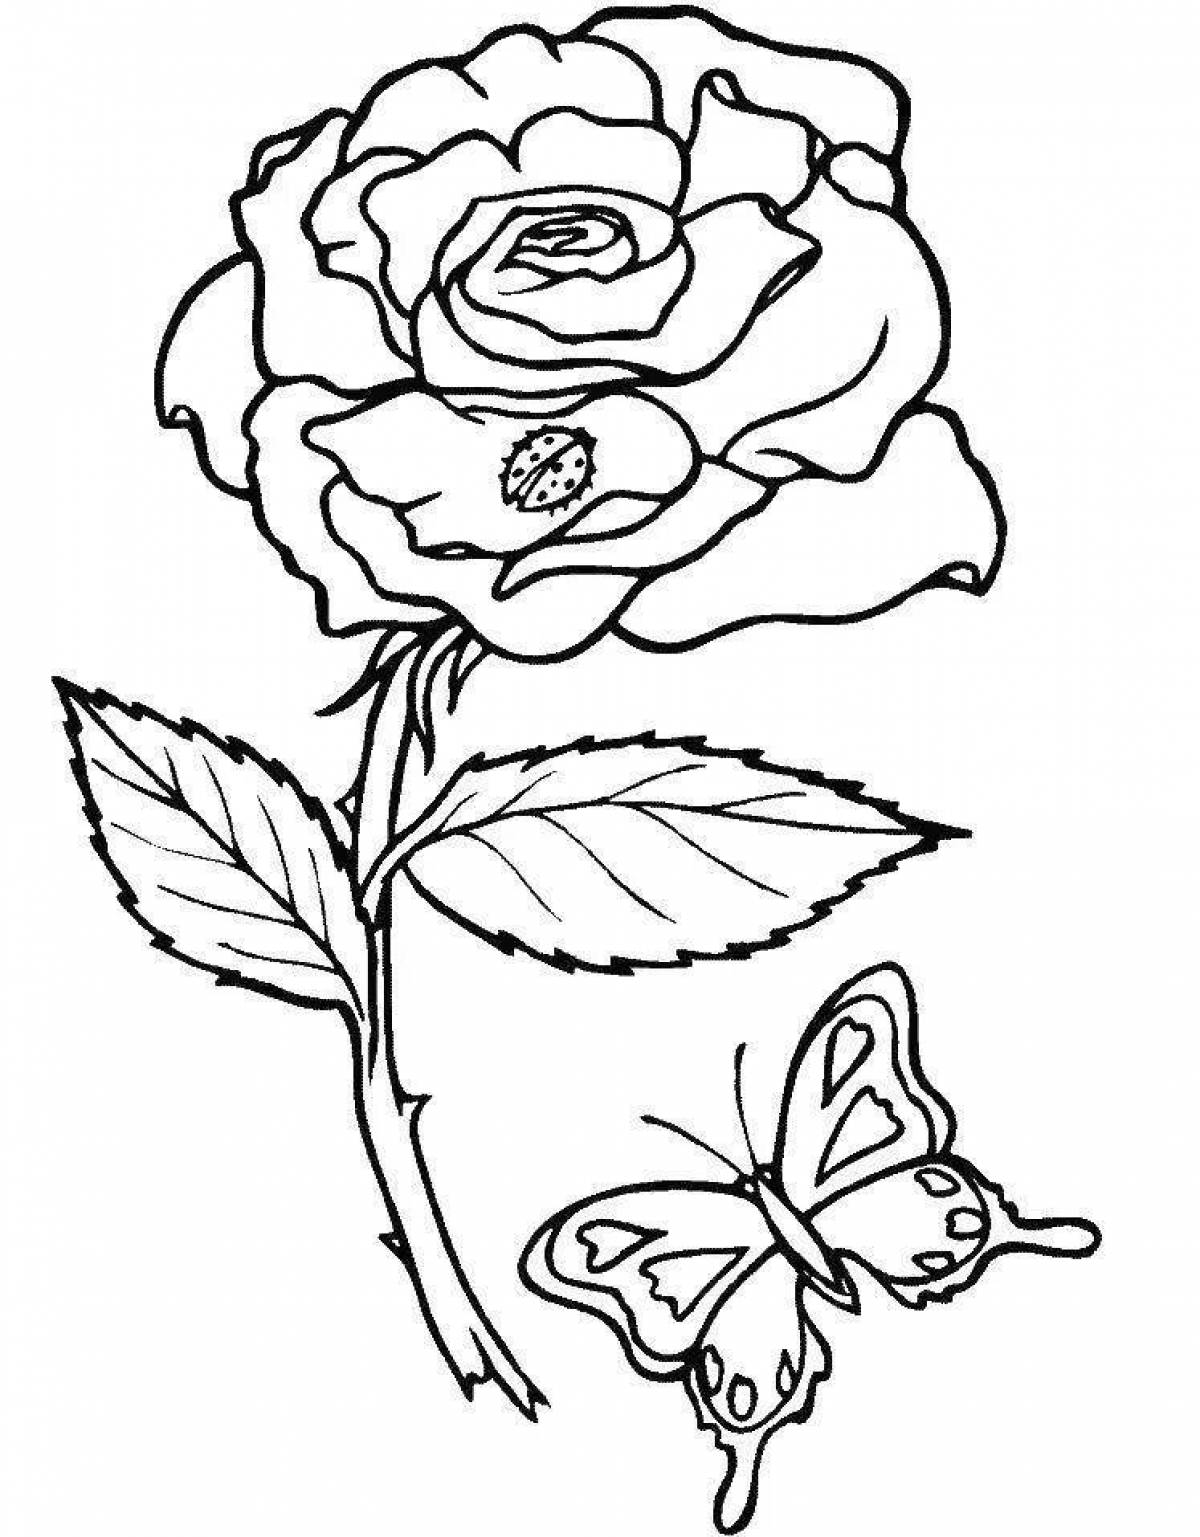 Coloring book gorgeous rose